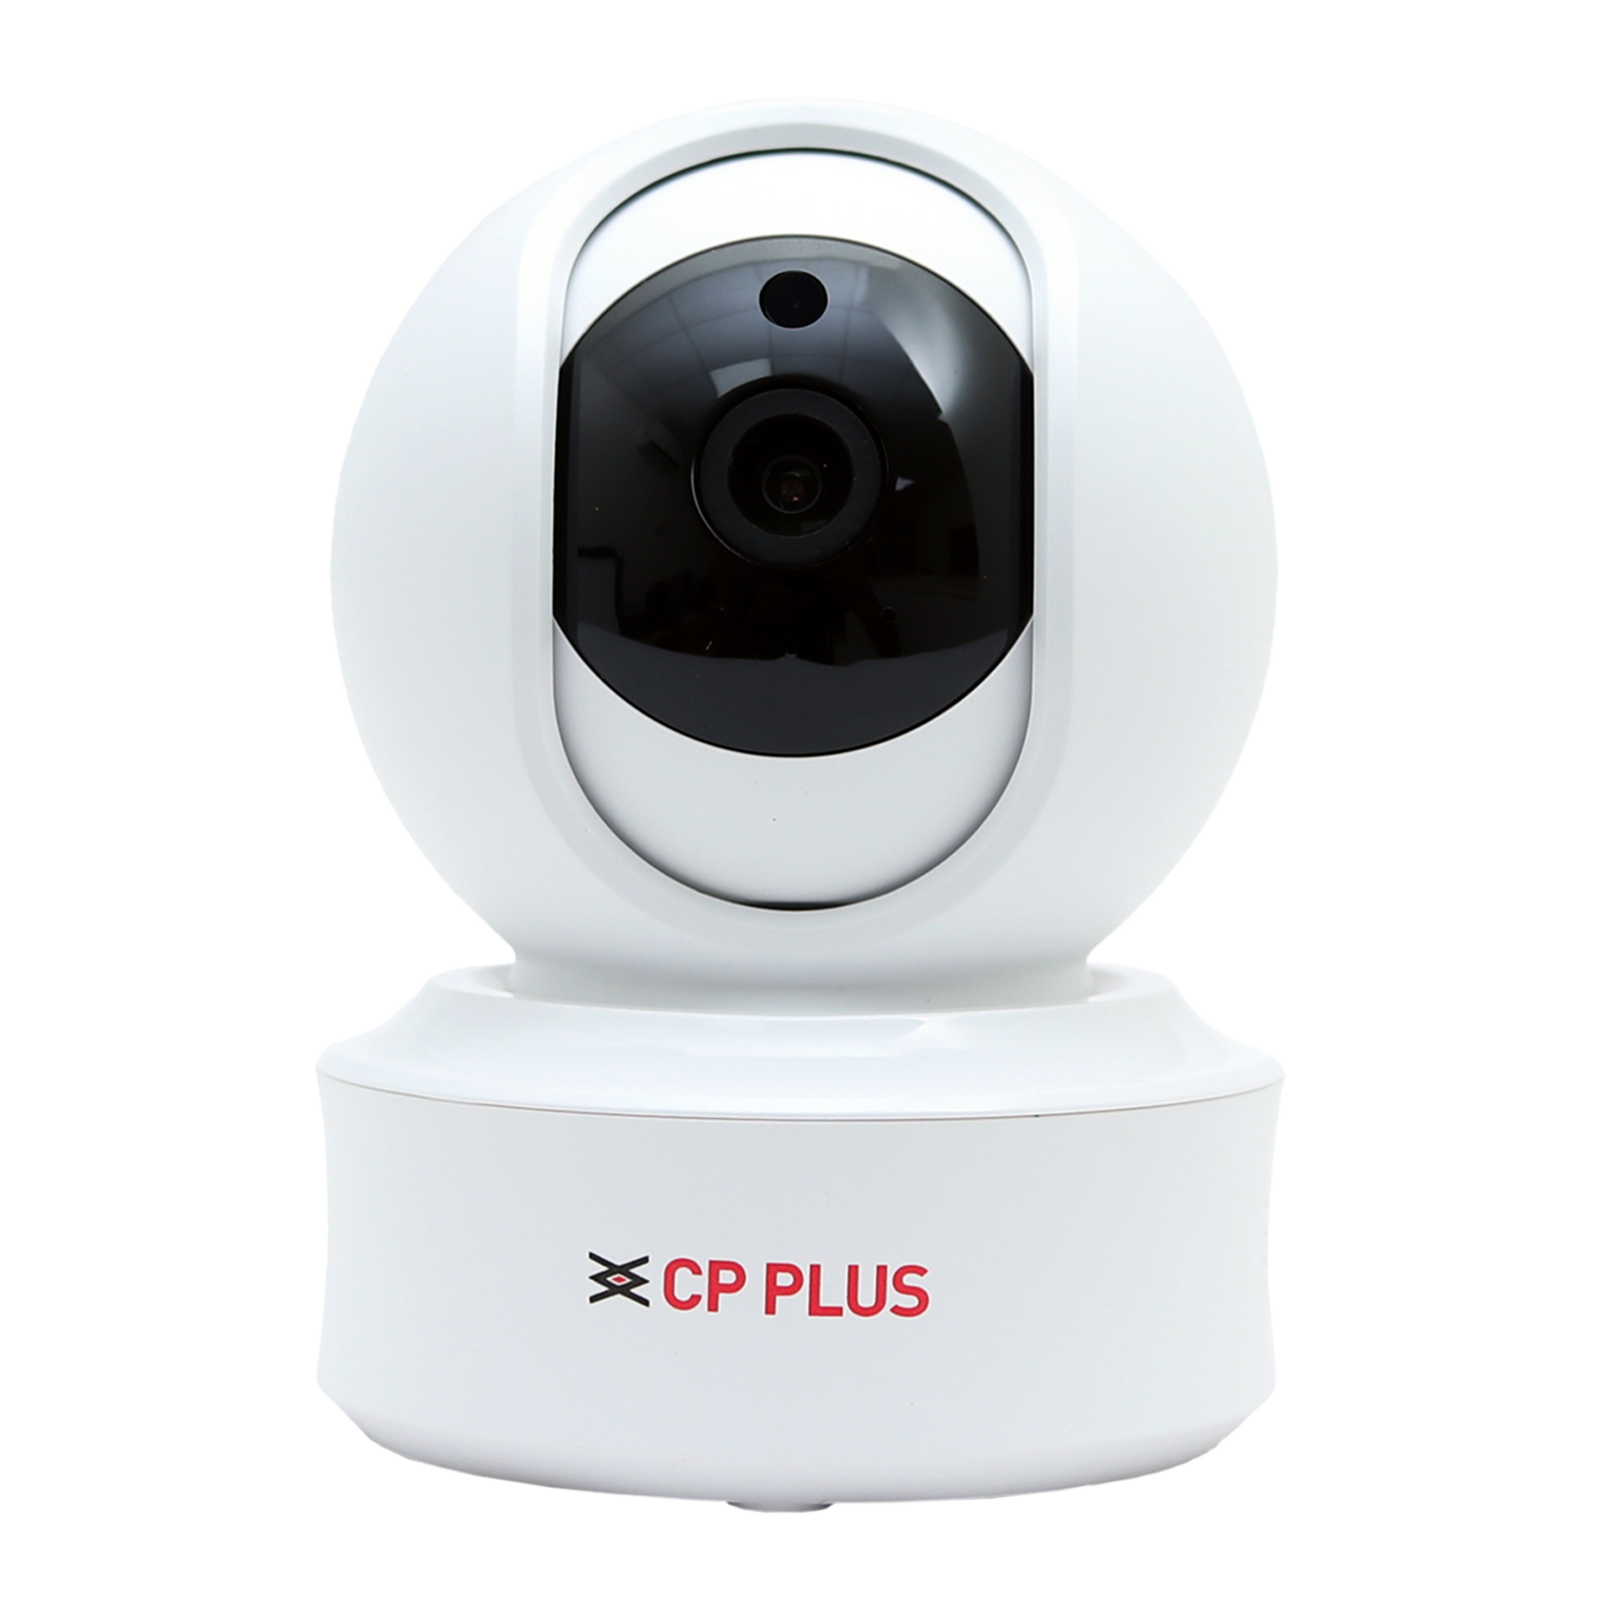 CP PLUS Ezykam Smart CCTV Security Camera (Google Assistant Support, CP-E41A, White)